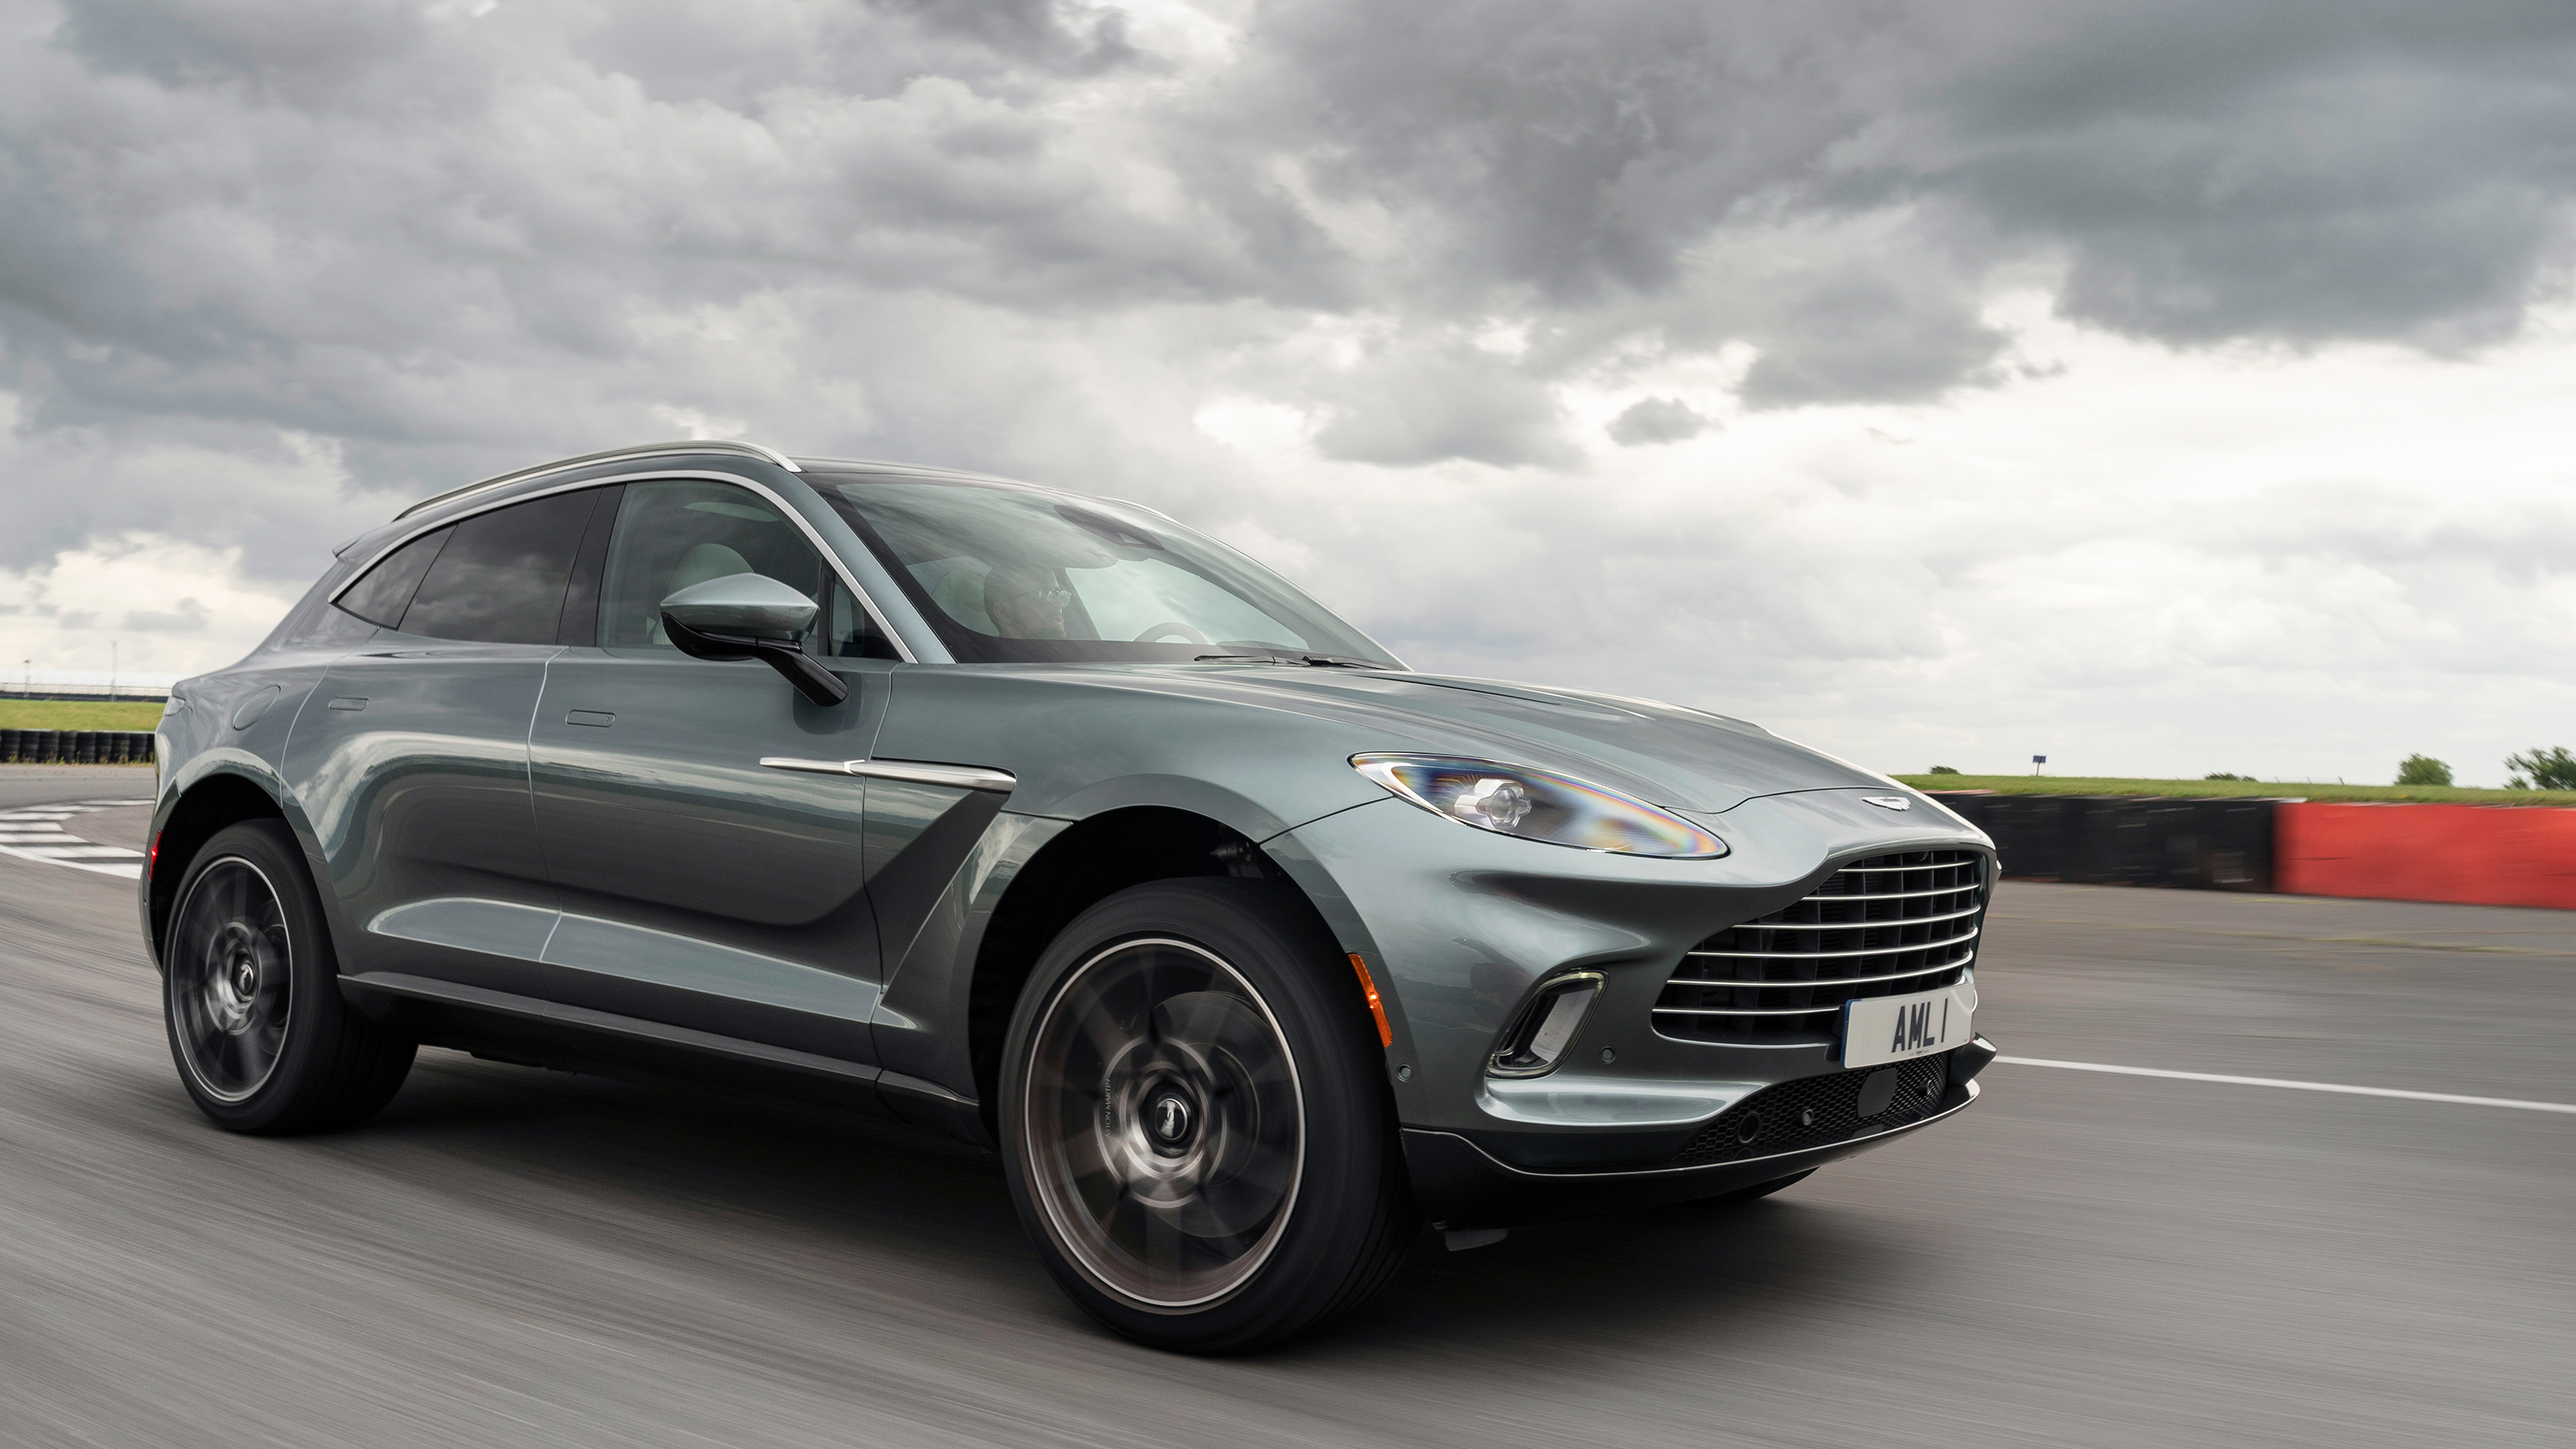 Aston Martin Dbx Review The First Performance Suv To Deliver On Its Promise Evo